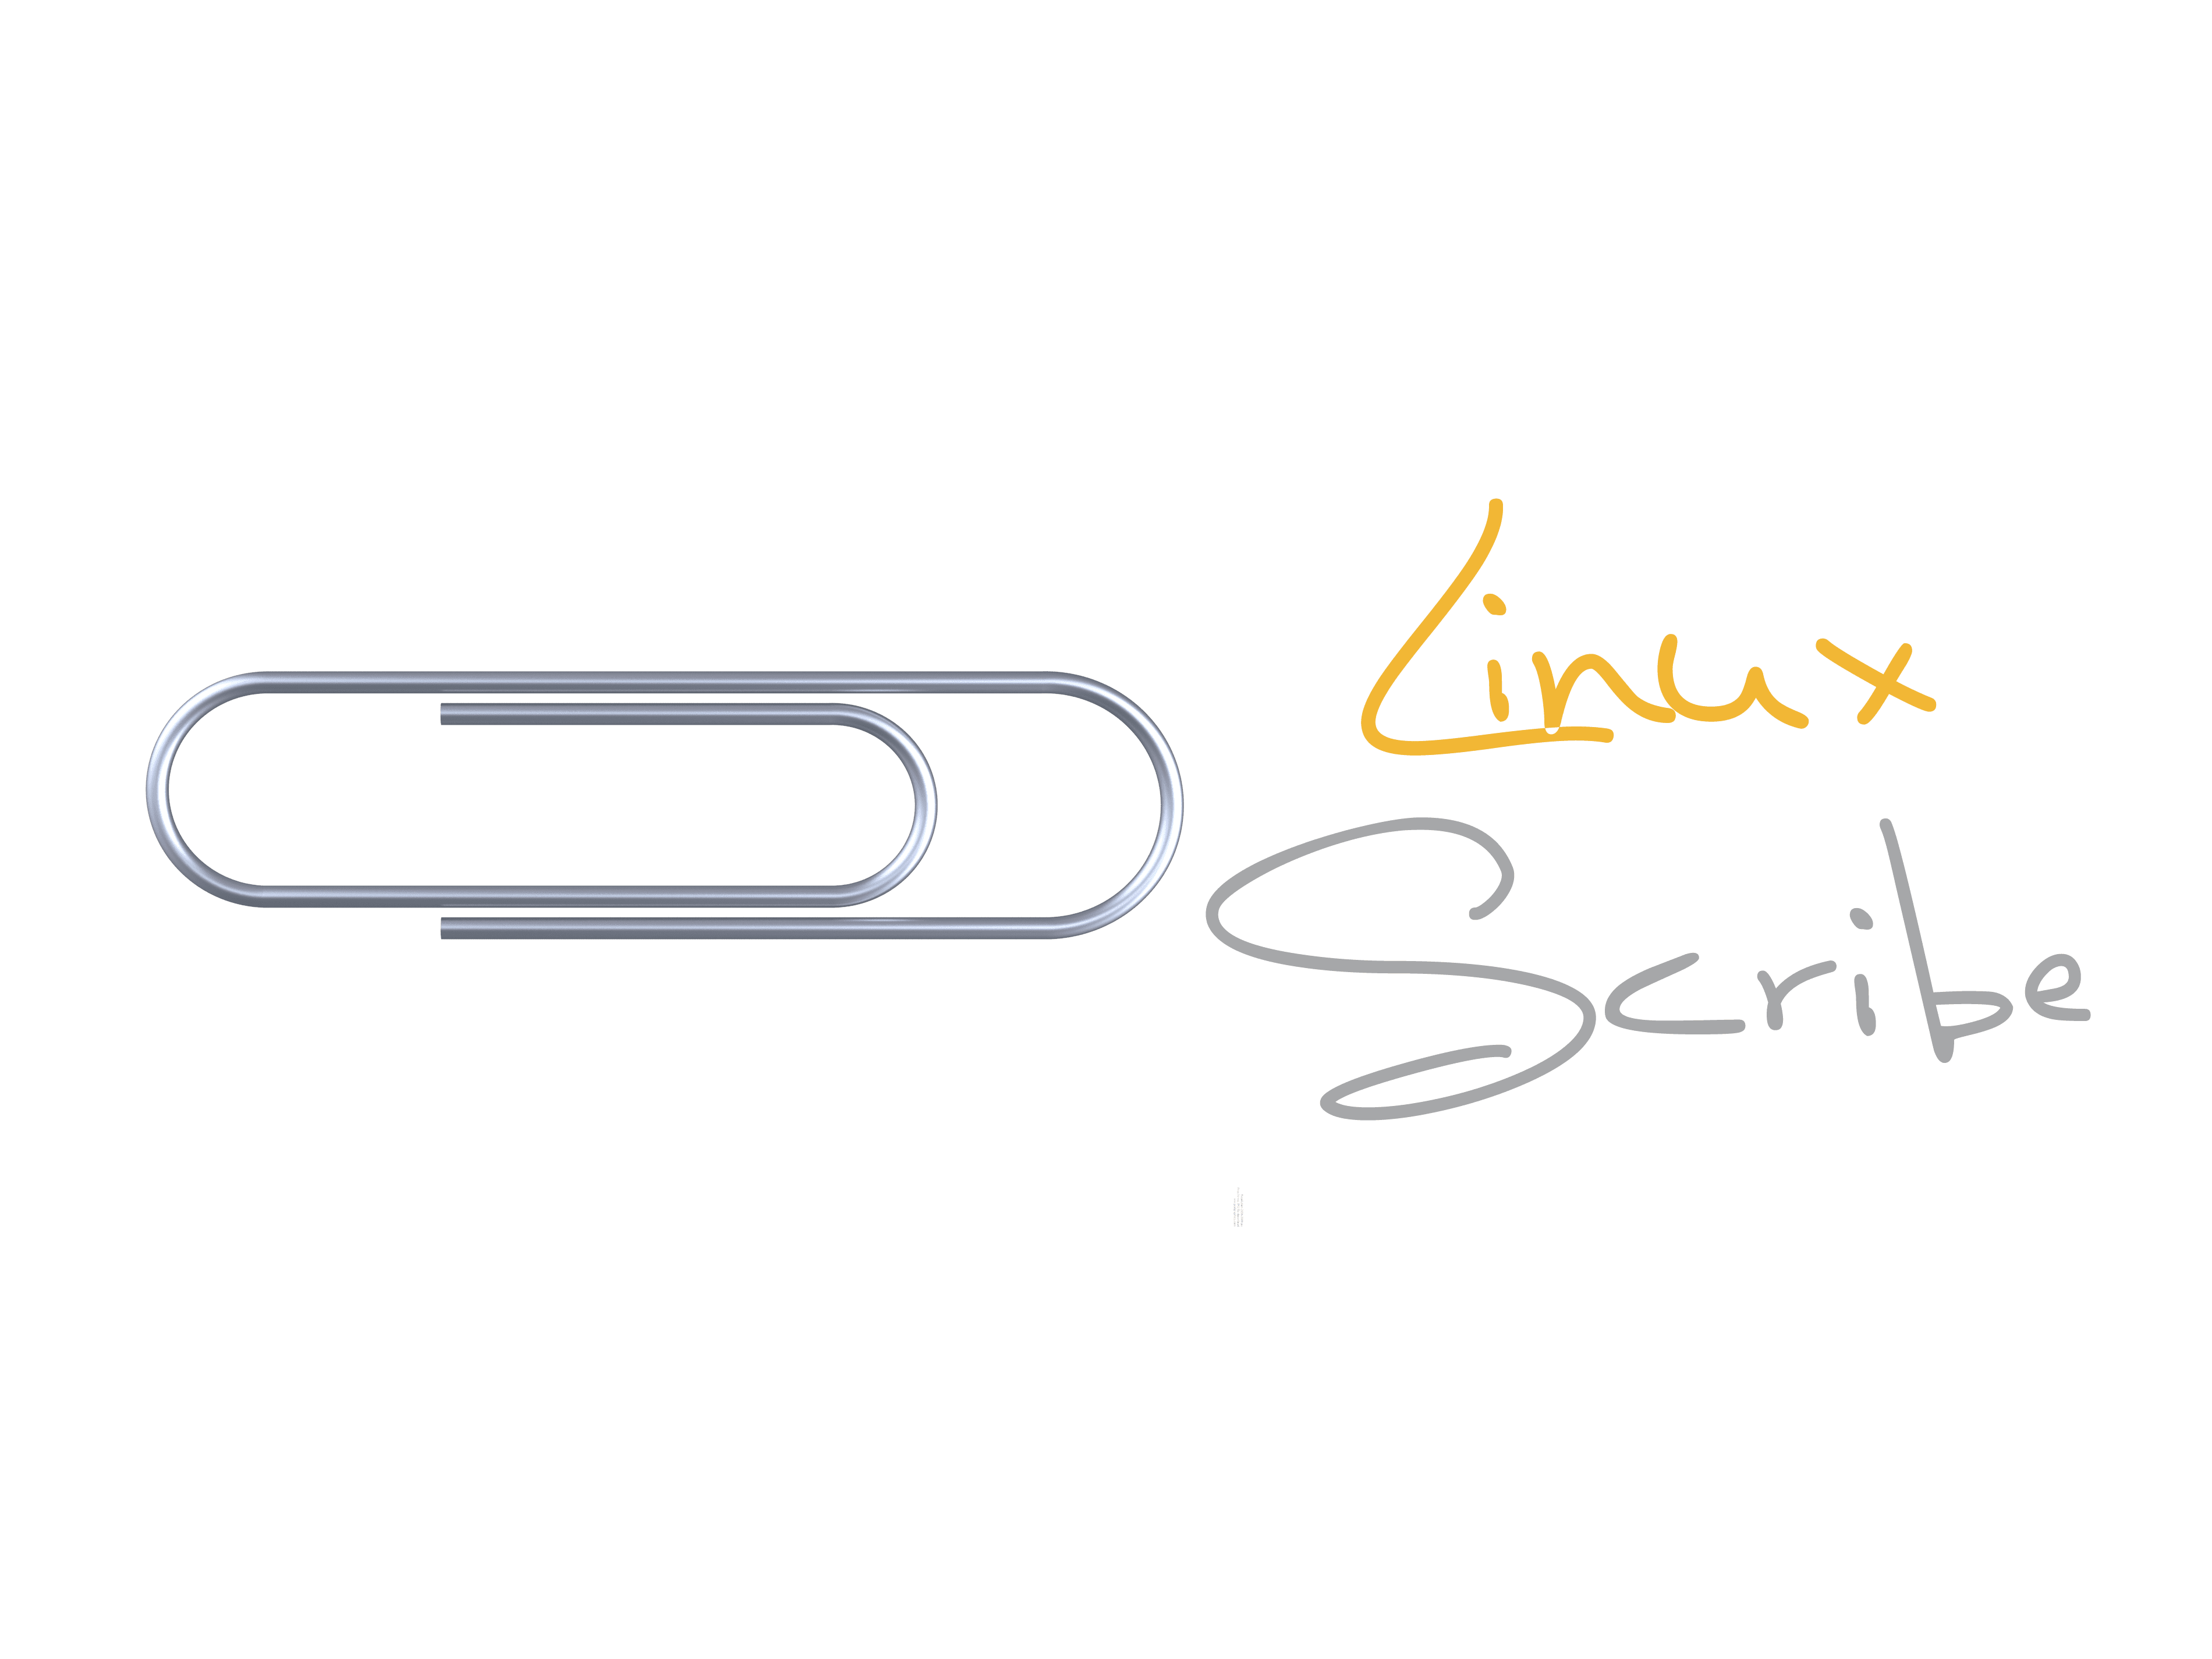 Linux Scribe